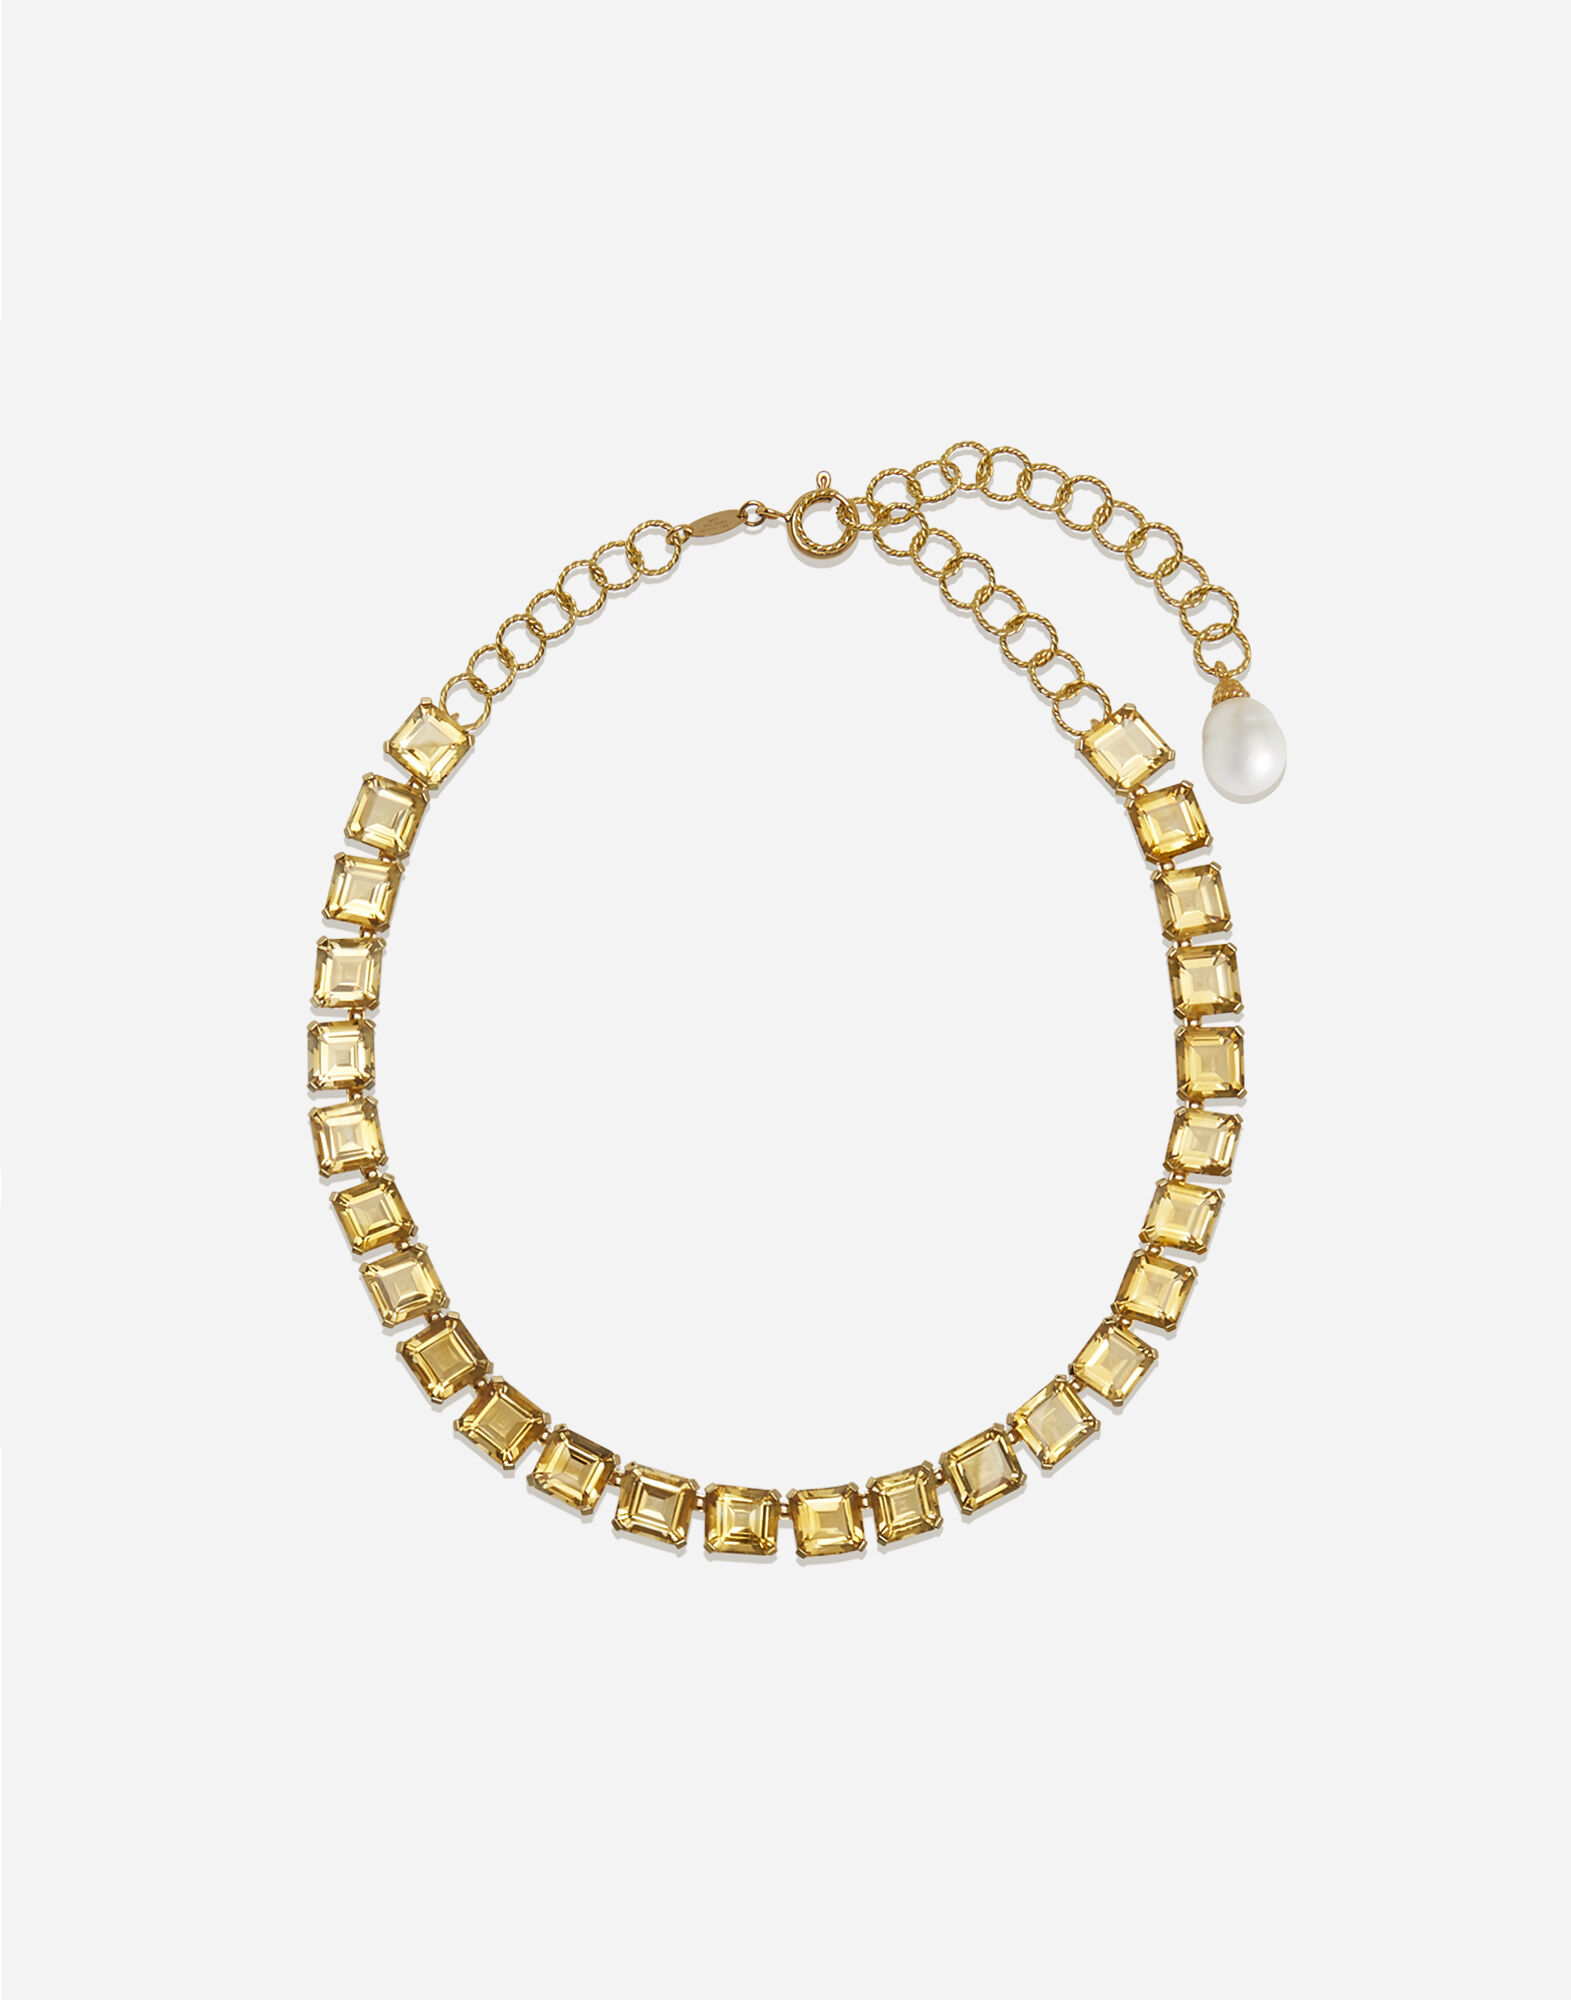 Dolce & Gabbana Anna necklace in yellow gold with citrine quartzes Gold WANR2GWMIXD